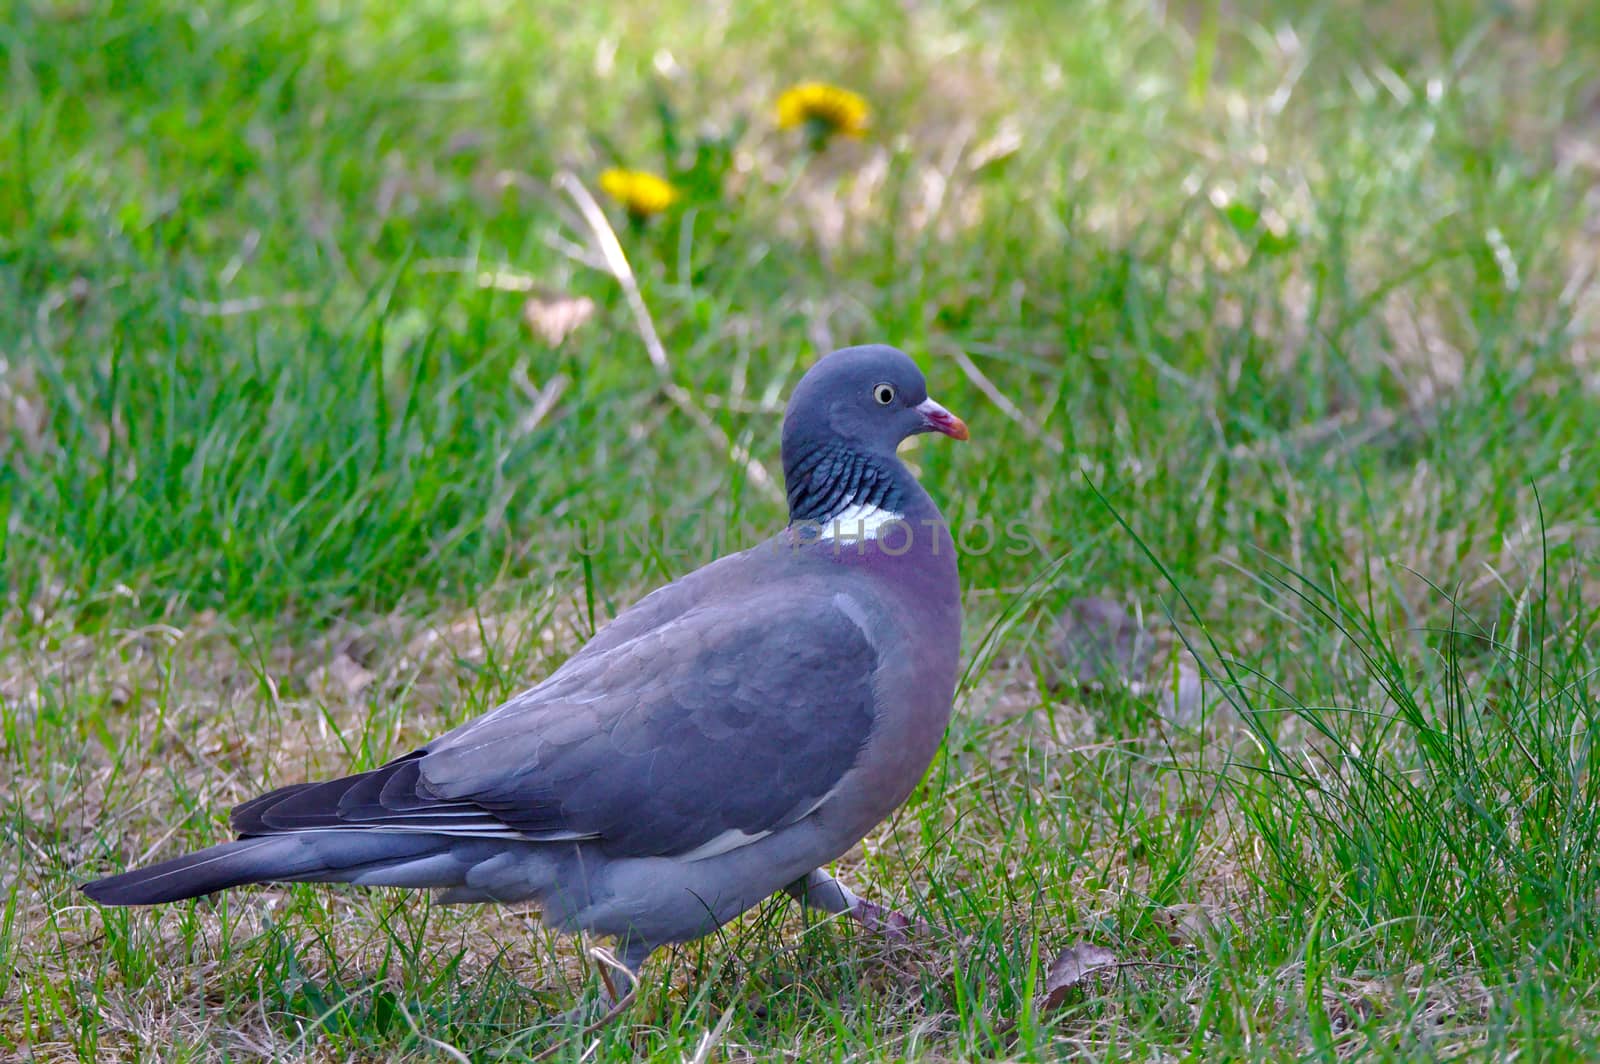 A wild wood pigeon walking on green lawn with some yellow flowers on the background.